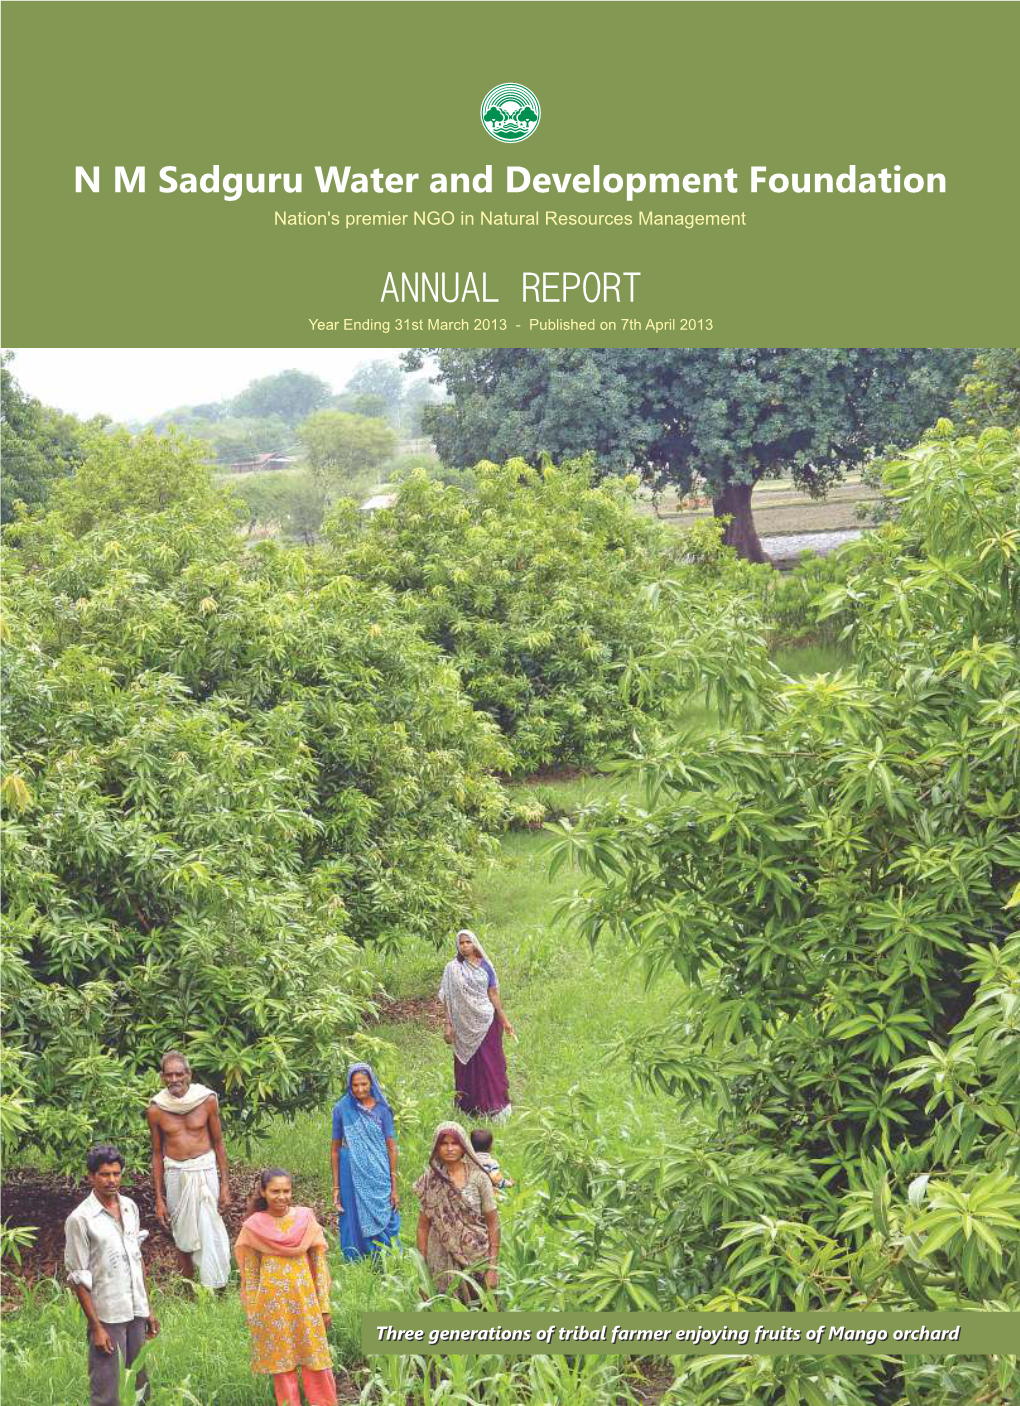 ANNUAL REPORT Year Ending 31St March 2013 - Published on 7Th April 2013